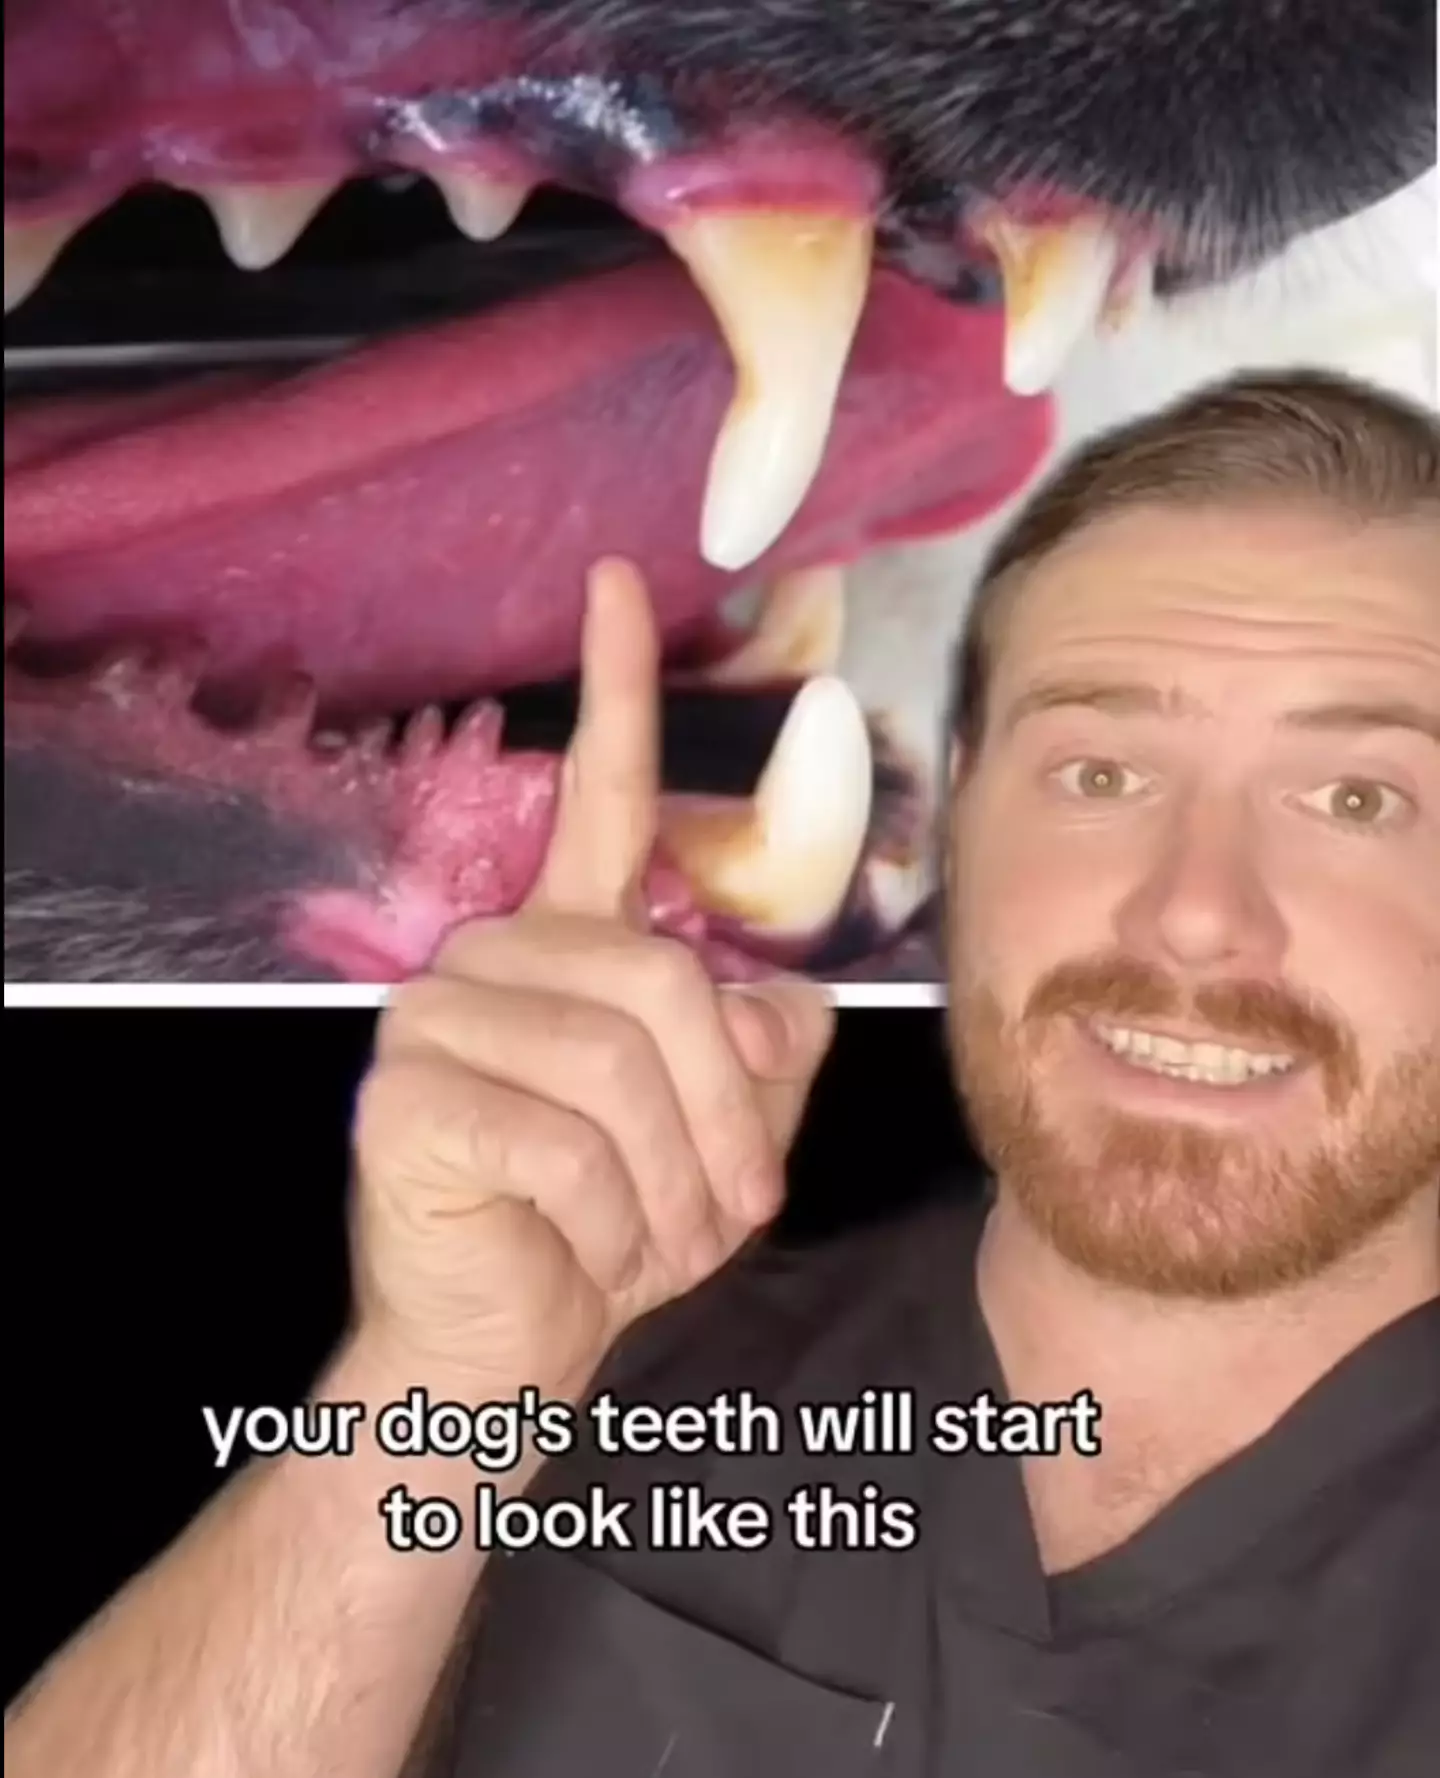 This is what your dog's teeth could look like.